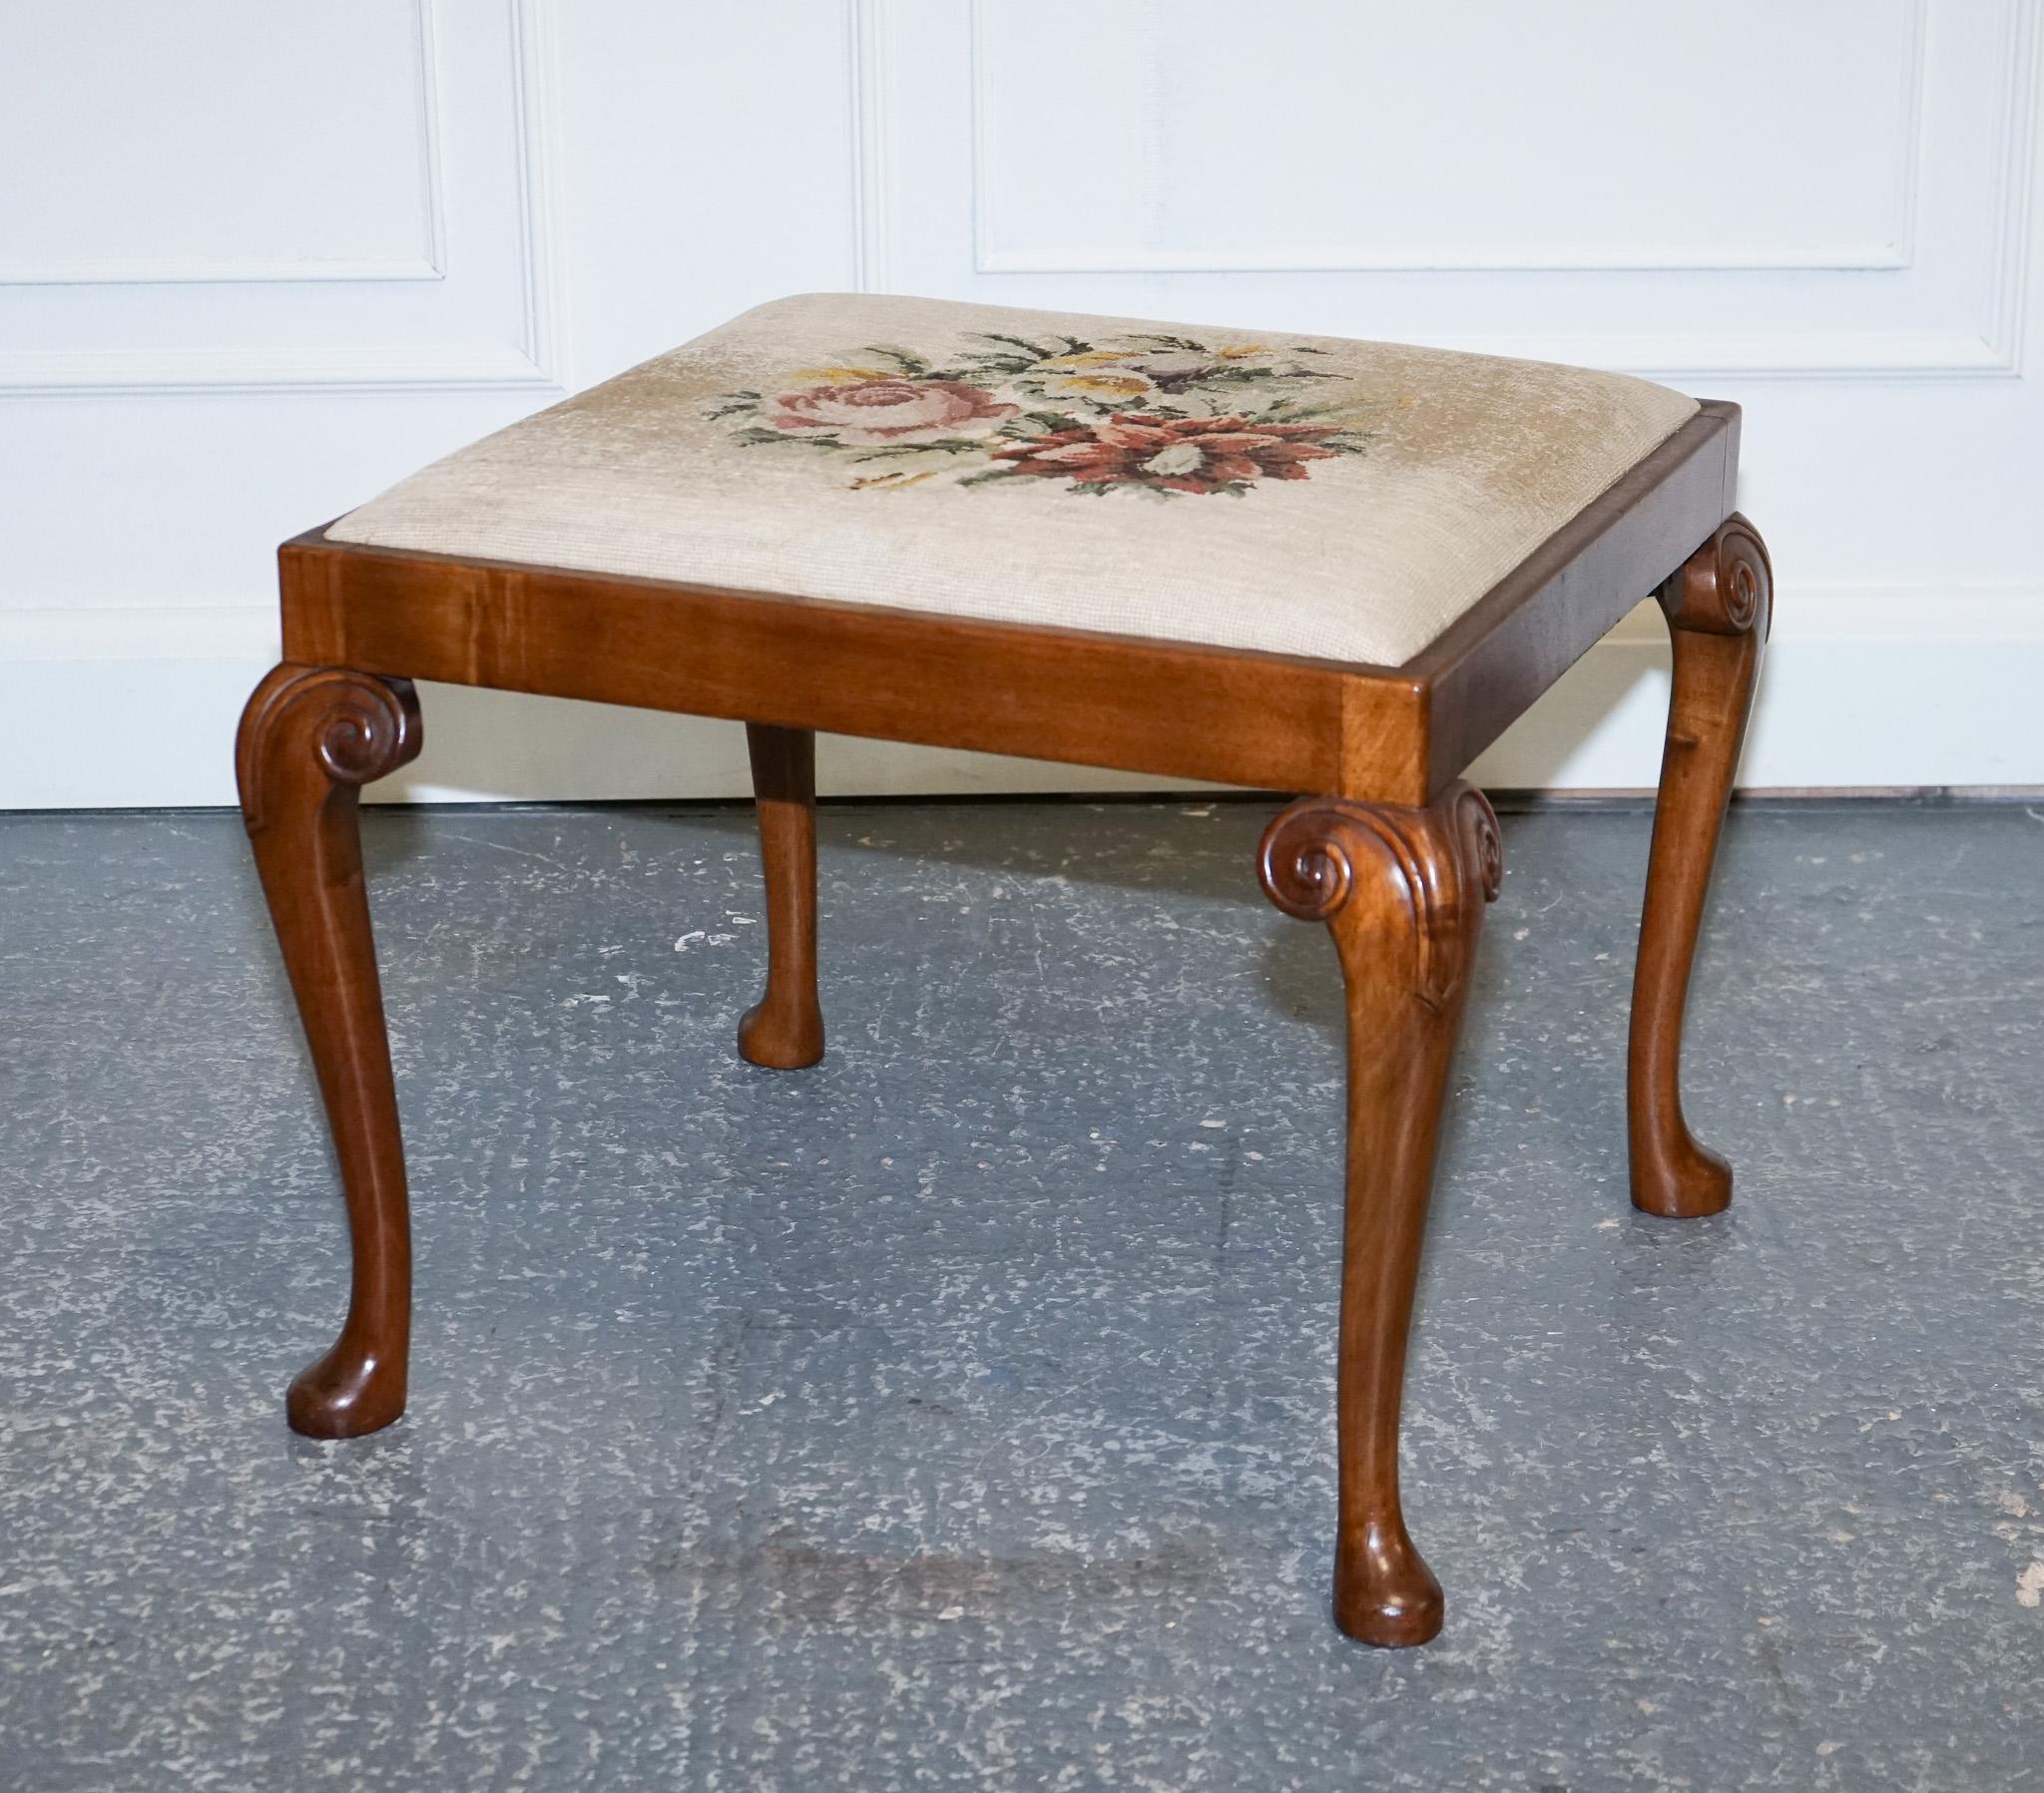 We are delighted to offer for sale this Antique Victorian Flower Embroidery Piano Stool With Carved Queen Anne legs

This Antique Victorian Flower Embroidery seat Piano Stool with Queen Anne legs is a stunning piece of furniture that exudes